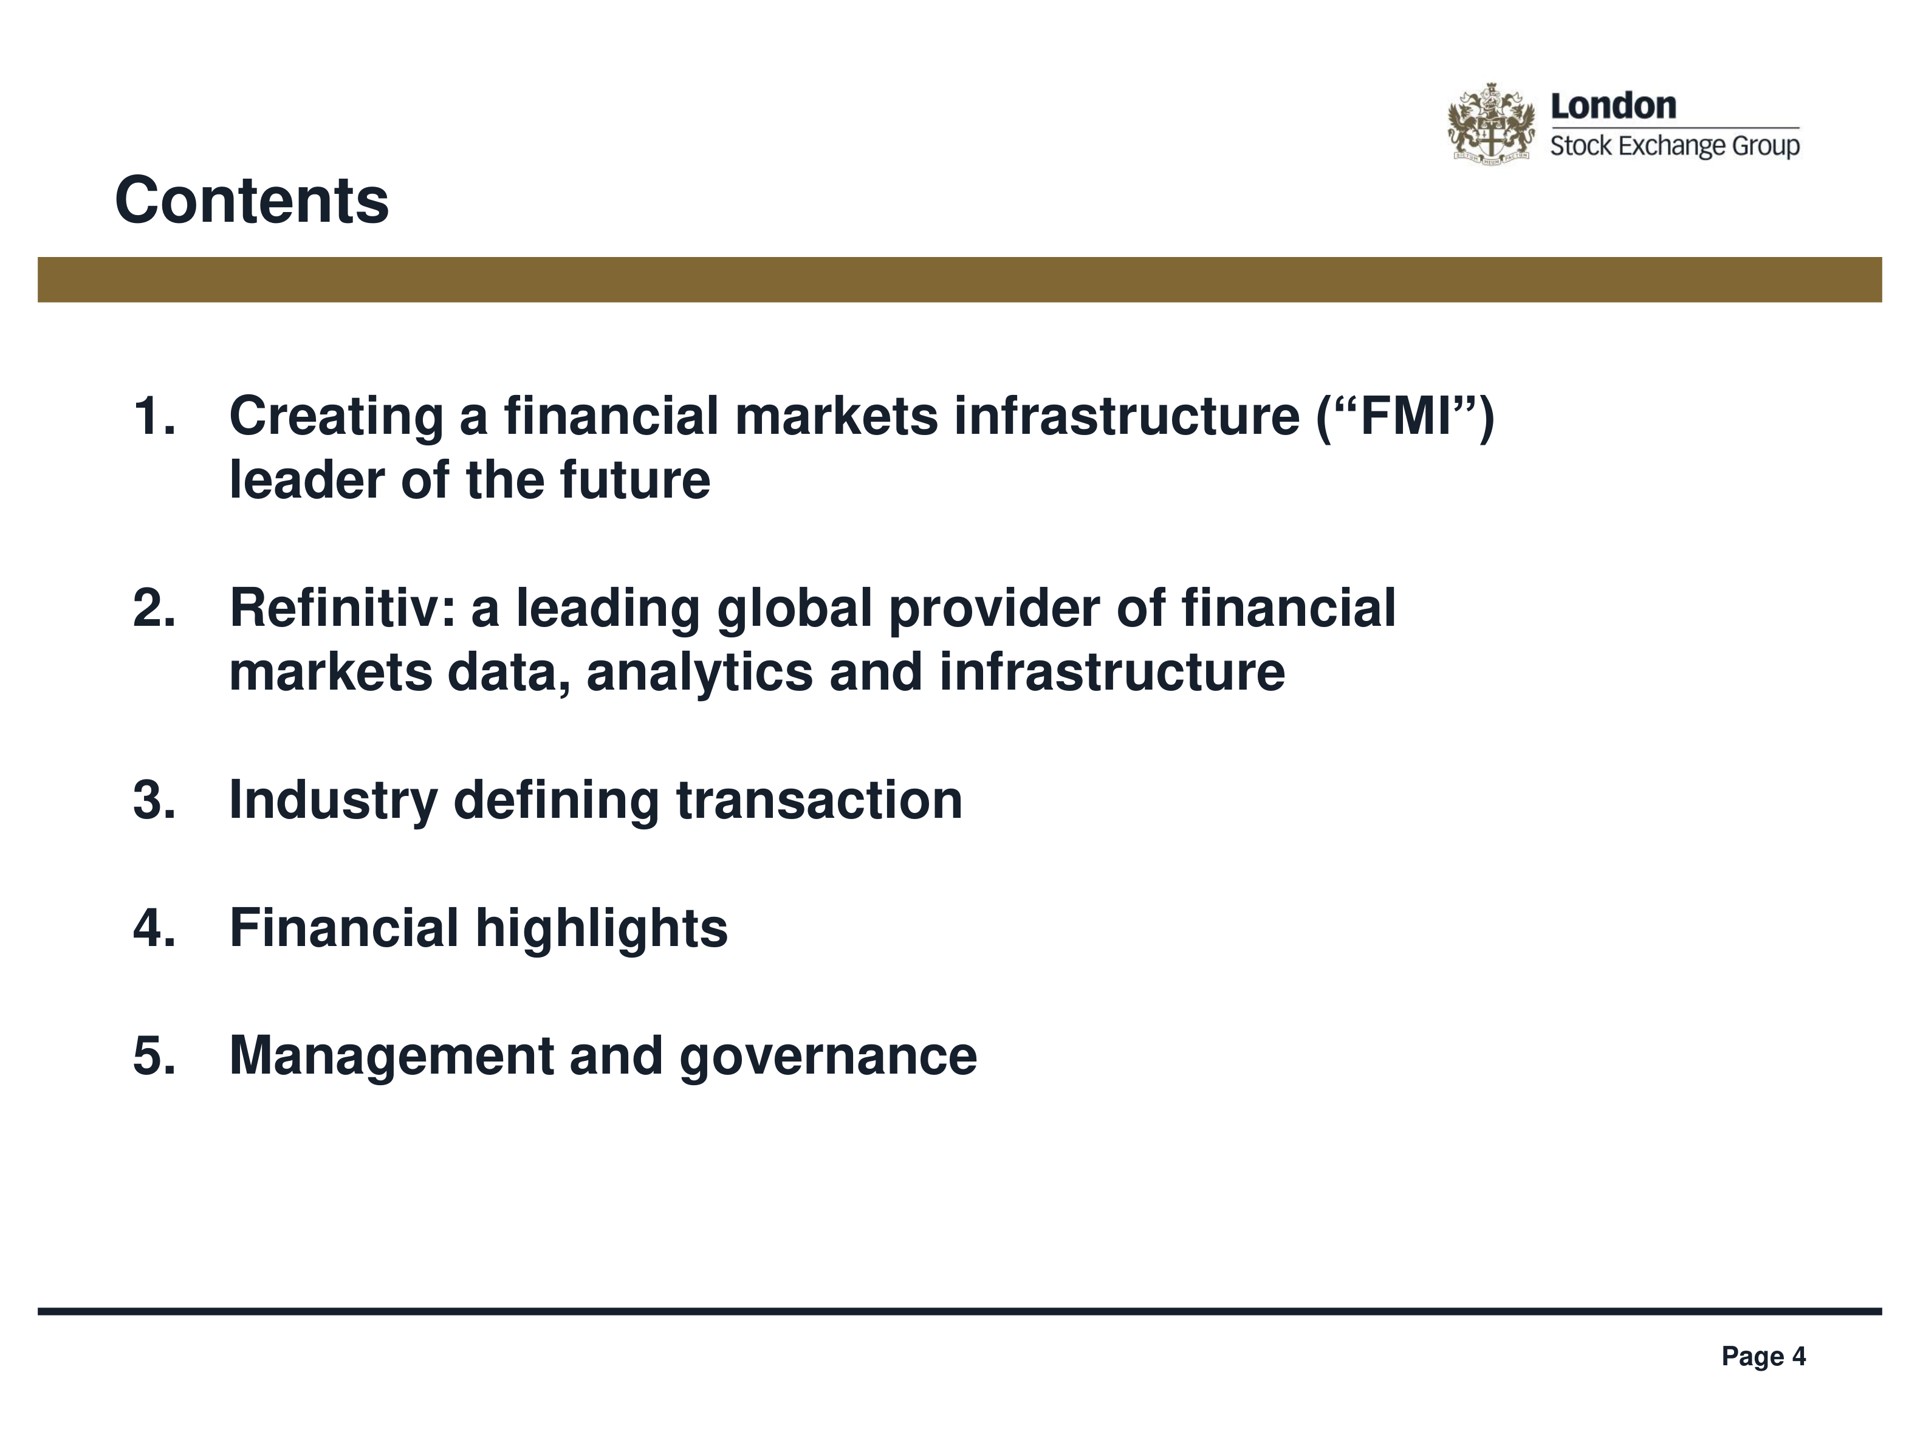 contents creating a financial markets infrastructure leader of the future a leading global provider of financial markets data analytics and infrastructure industry defining transaction financial highlights management and governance | LSE